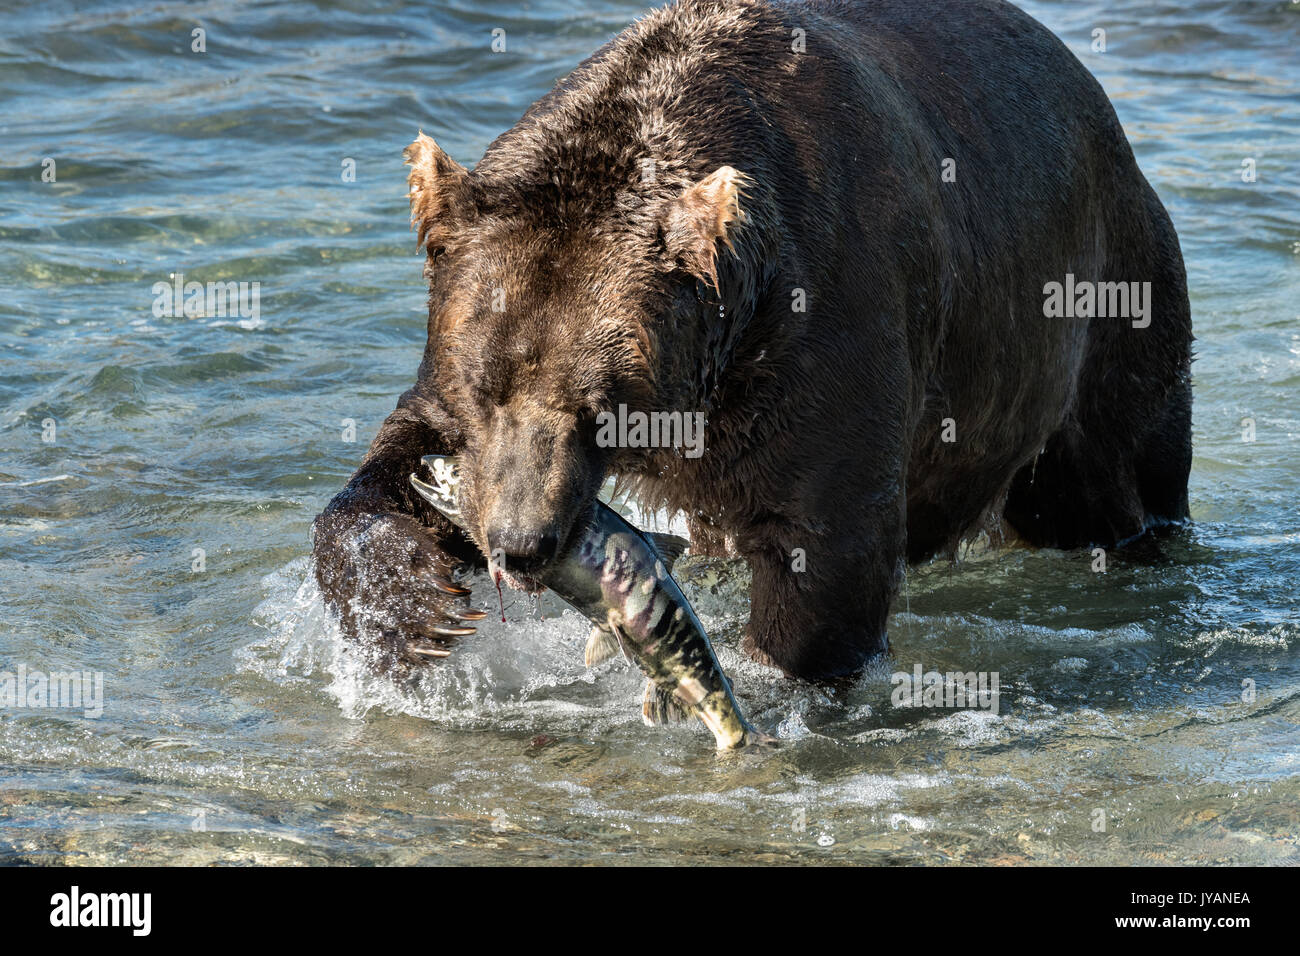 A large Grizzly bear boar catches a chum salmon in the upper McNeil River falls at the McNeil River State Game Sanctuary on the Kenai Peninsula, Alaska. The remote site is accessed only with a special permit and is the world’s largest seasonal population of brown bears. Stock Photo